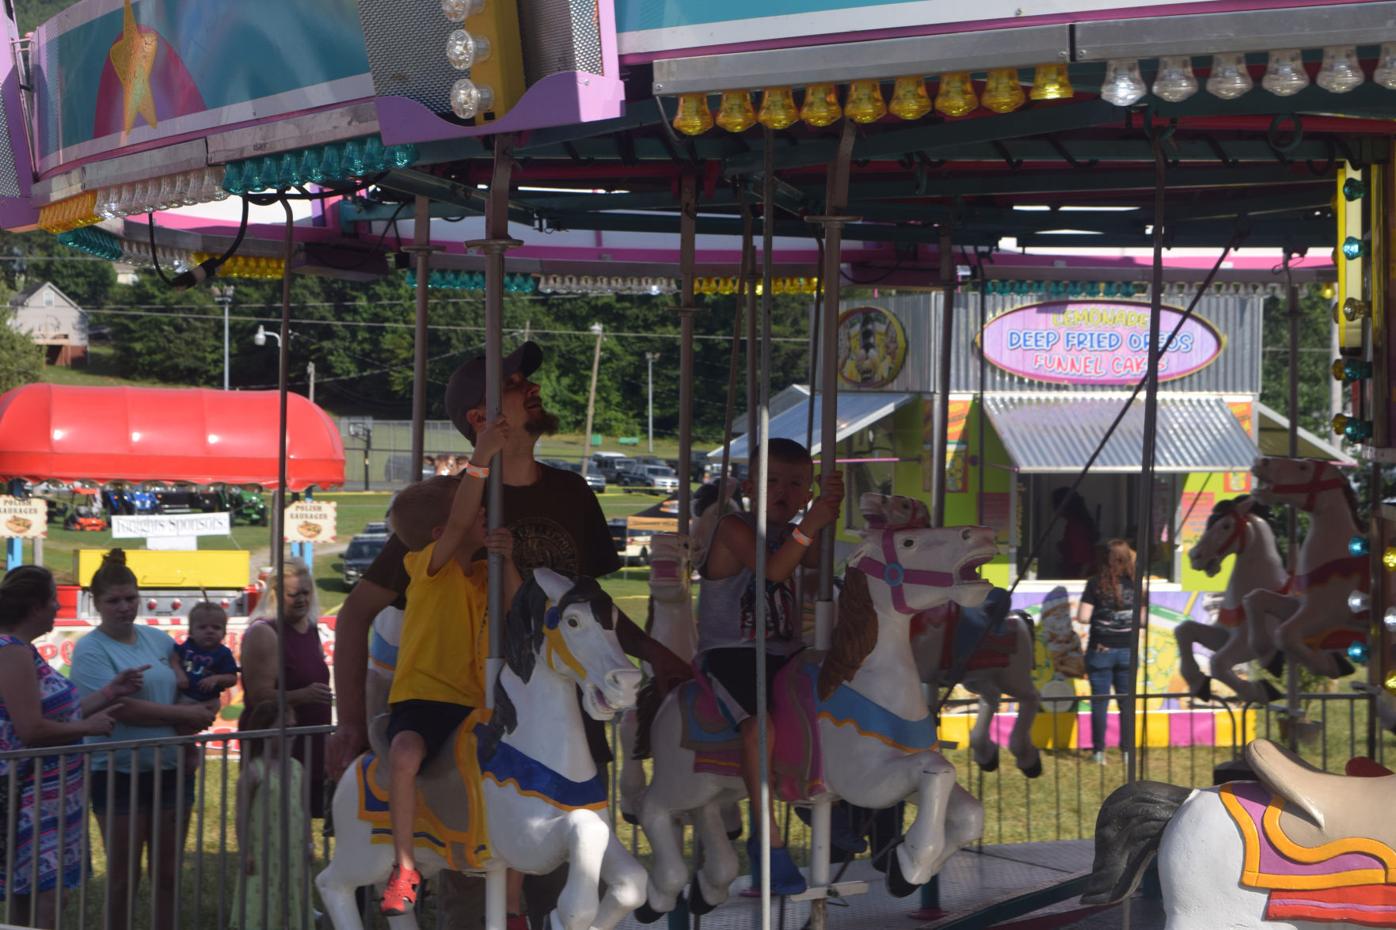 Scenes from the Meigs County Fair News